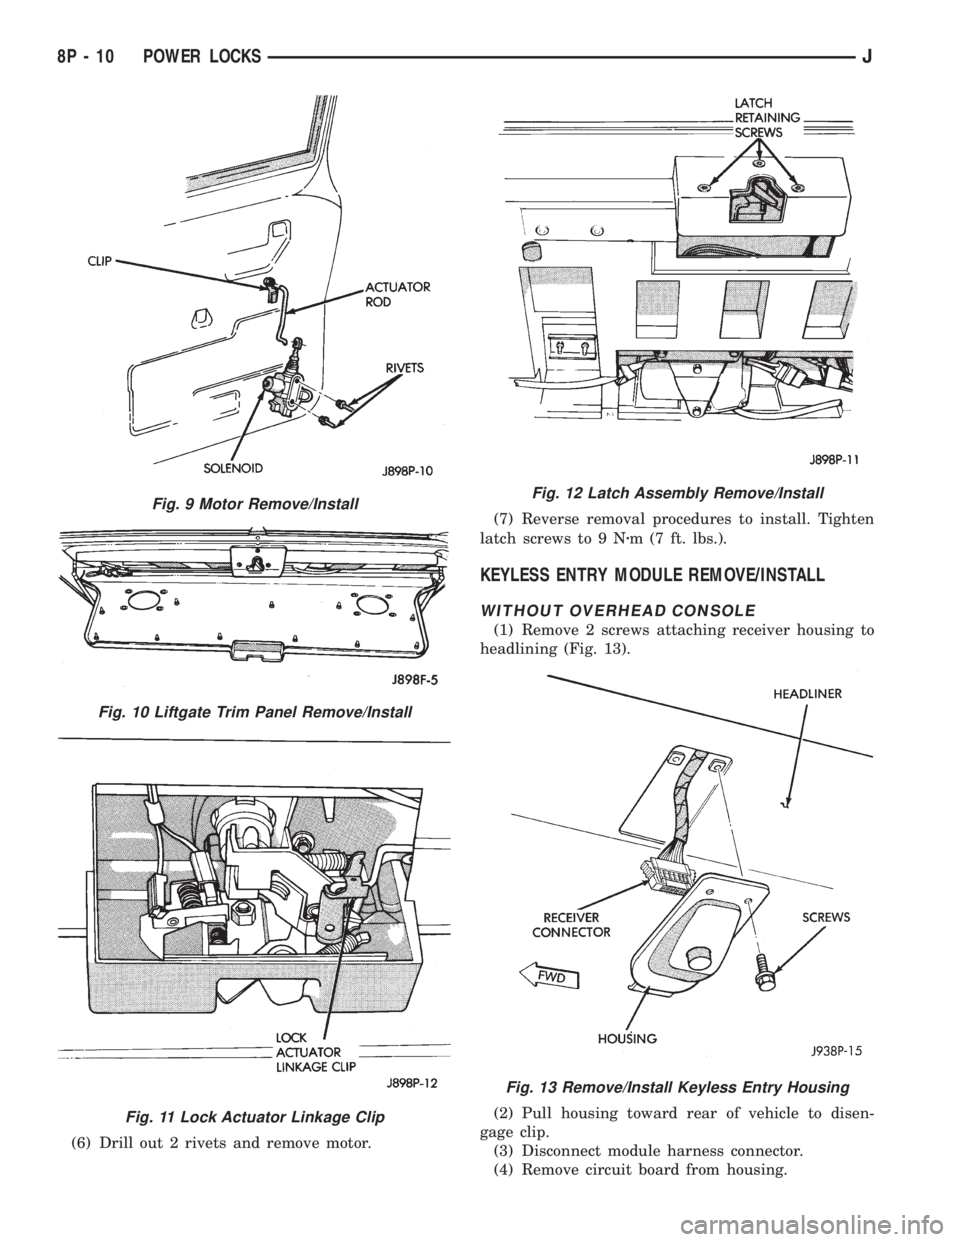 JEEP CHEROKEE 1995  Service Repair Manual (6) Drill out 2 rivets and remove motor.(7) Reverse removal procedures to install. Tighten
latch screws to 9 Nzm (7 ft. lbs.).
KEYLESS ENTRY MODULE REMOVE/INSTALL
WITHOUT OVERHEAD CONSOLE
(1) Remove 2